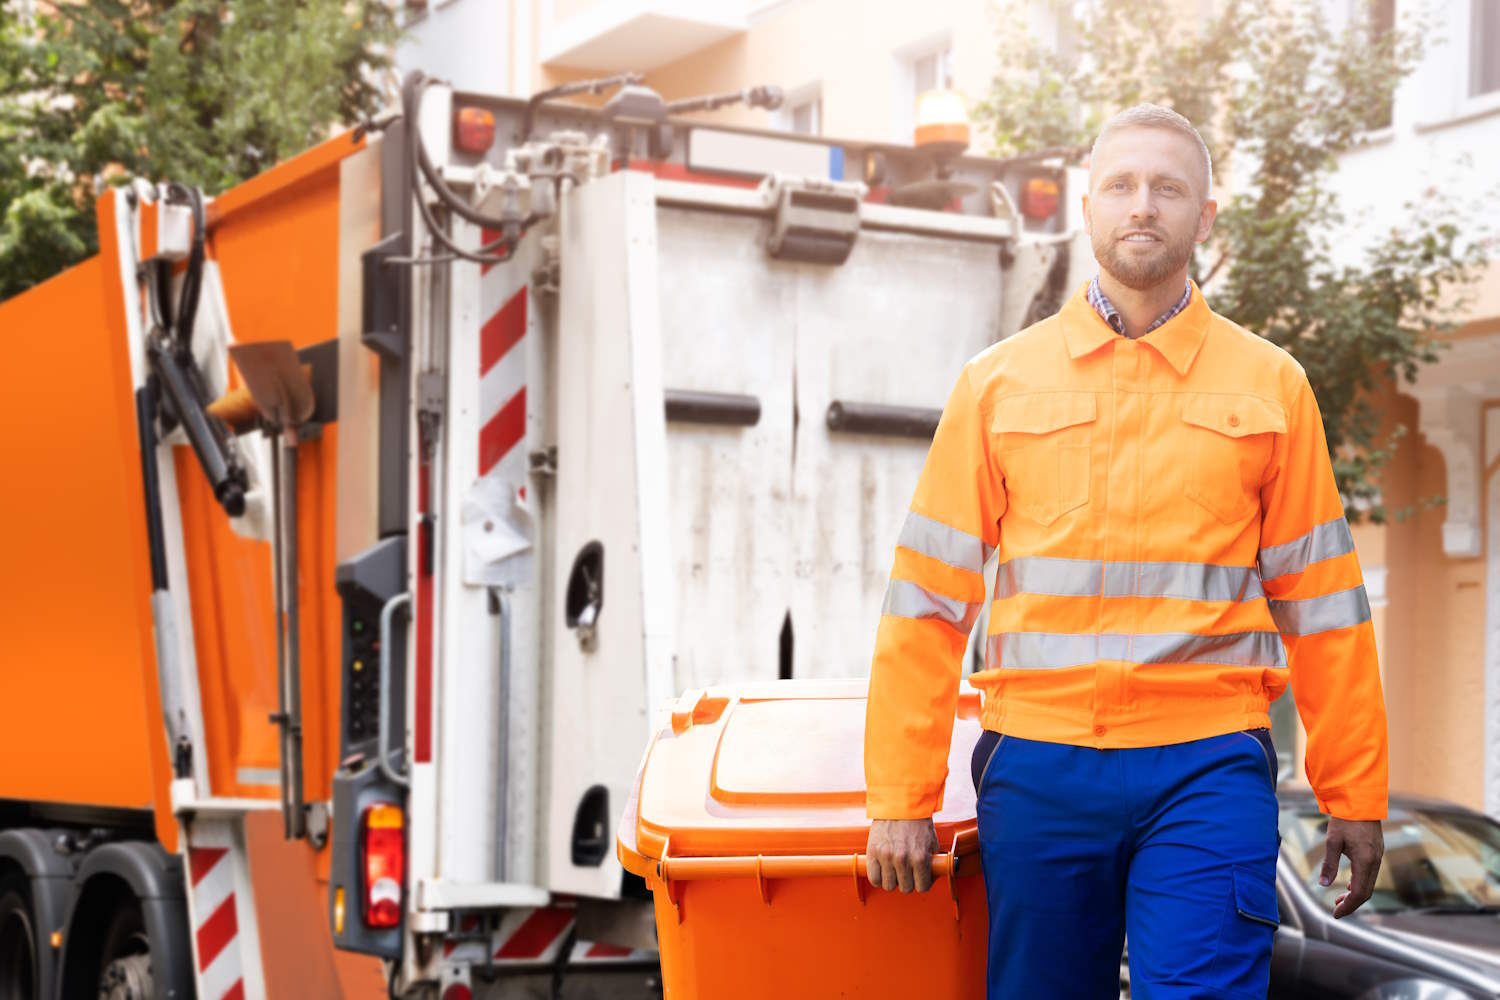 Reliable Waste Management with No Hidden Surcharges Leads to Average Savings of 32% for Fulcrum Members